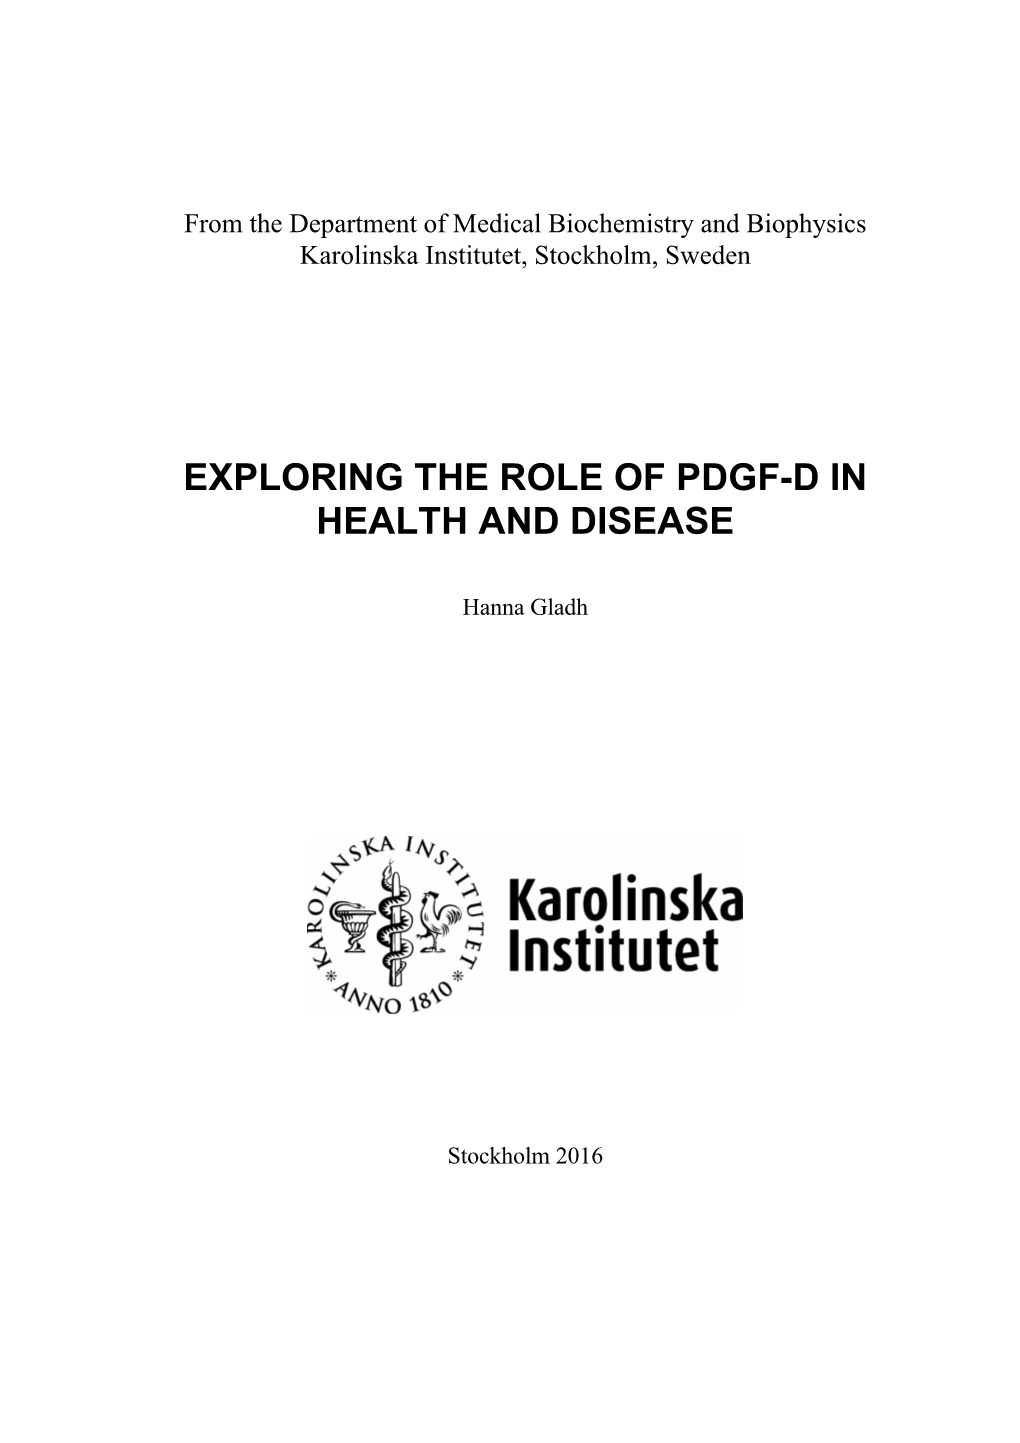 Exploring the Role of Pdgf-D in Health and Disease